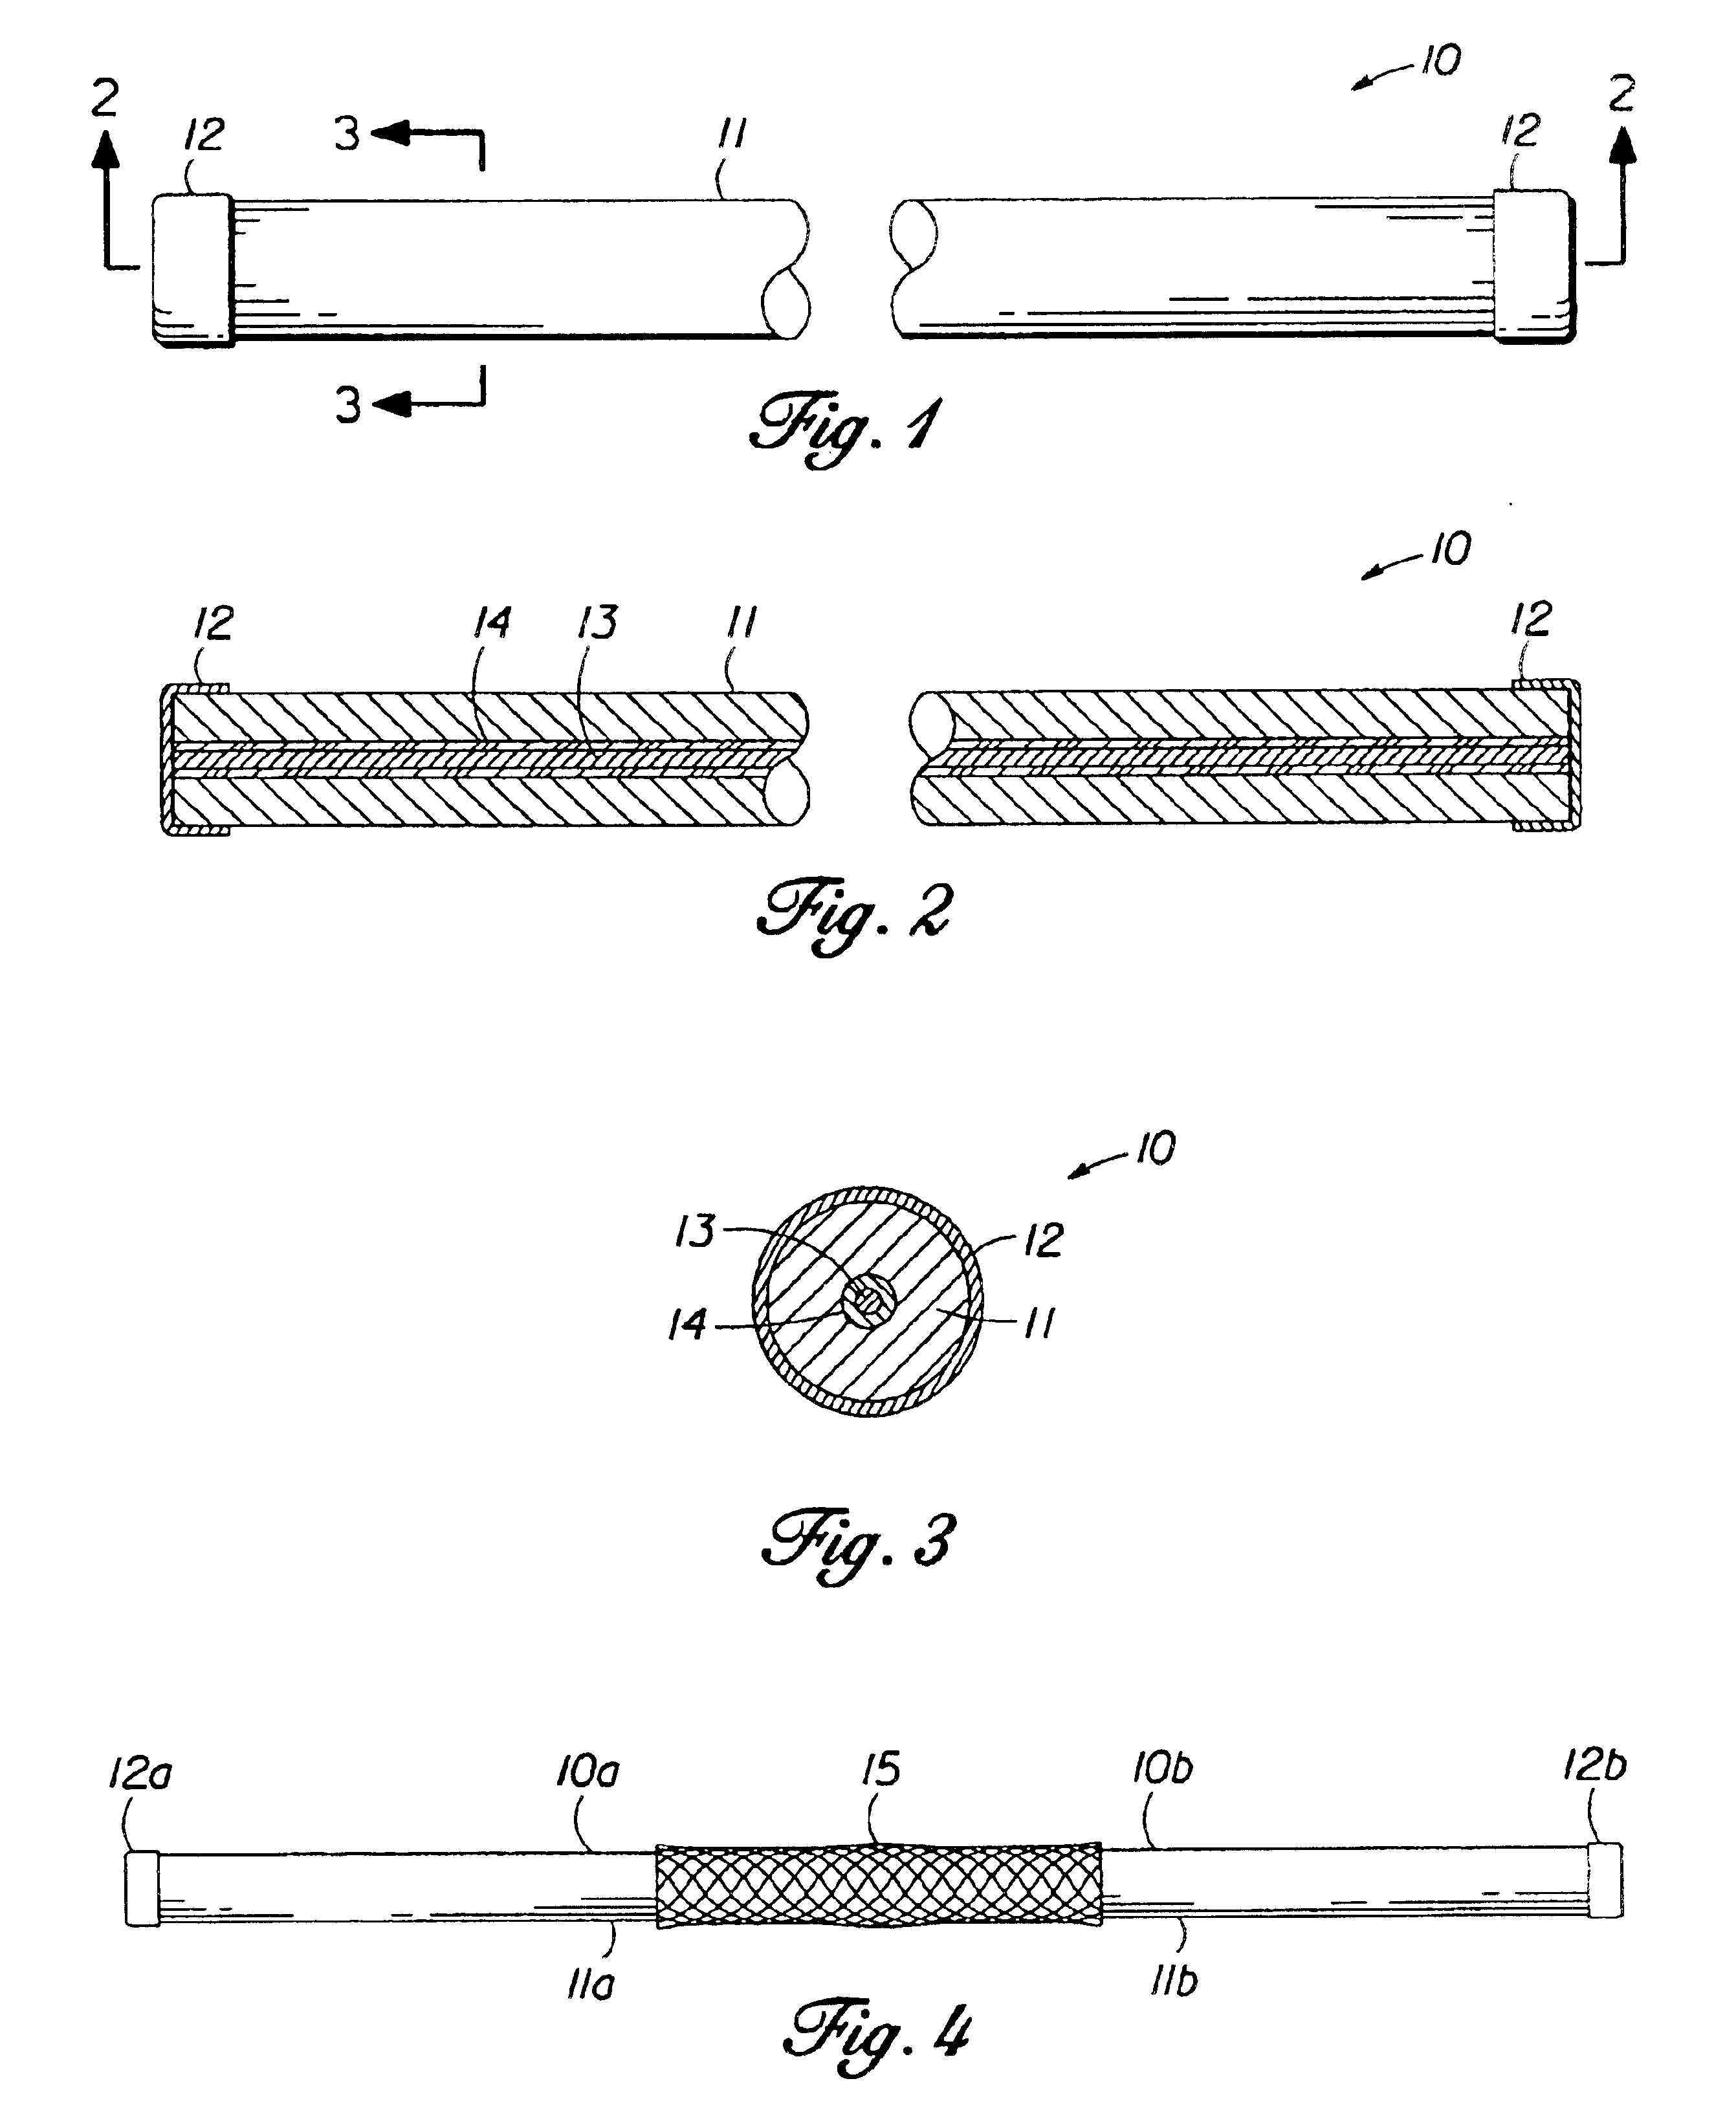 System of bendable strips with connectors